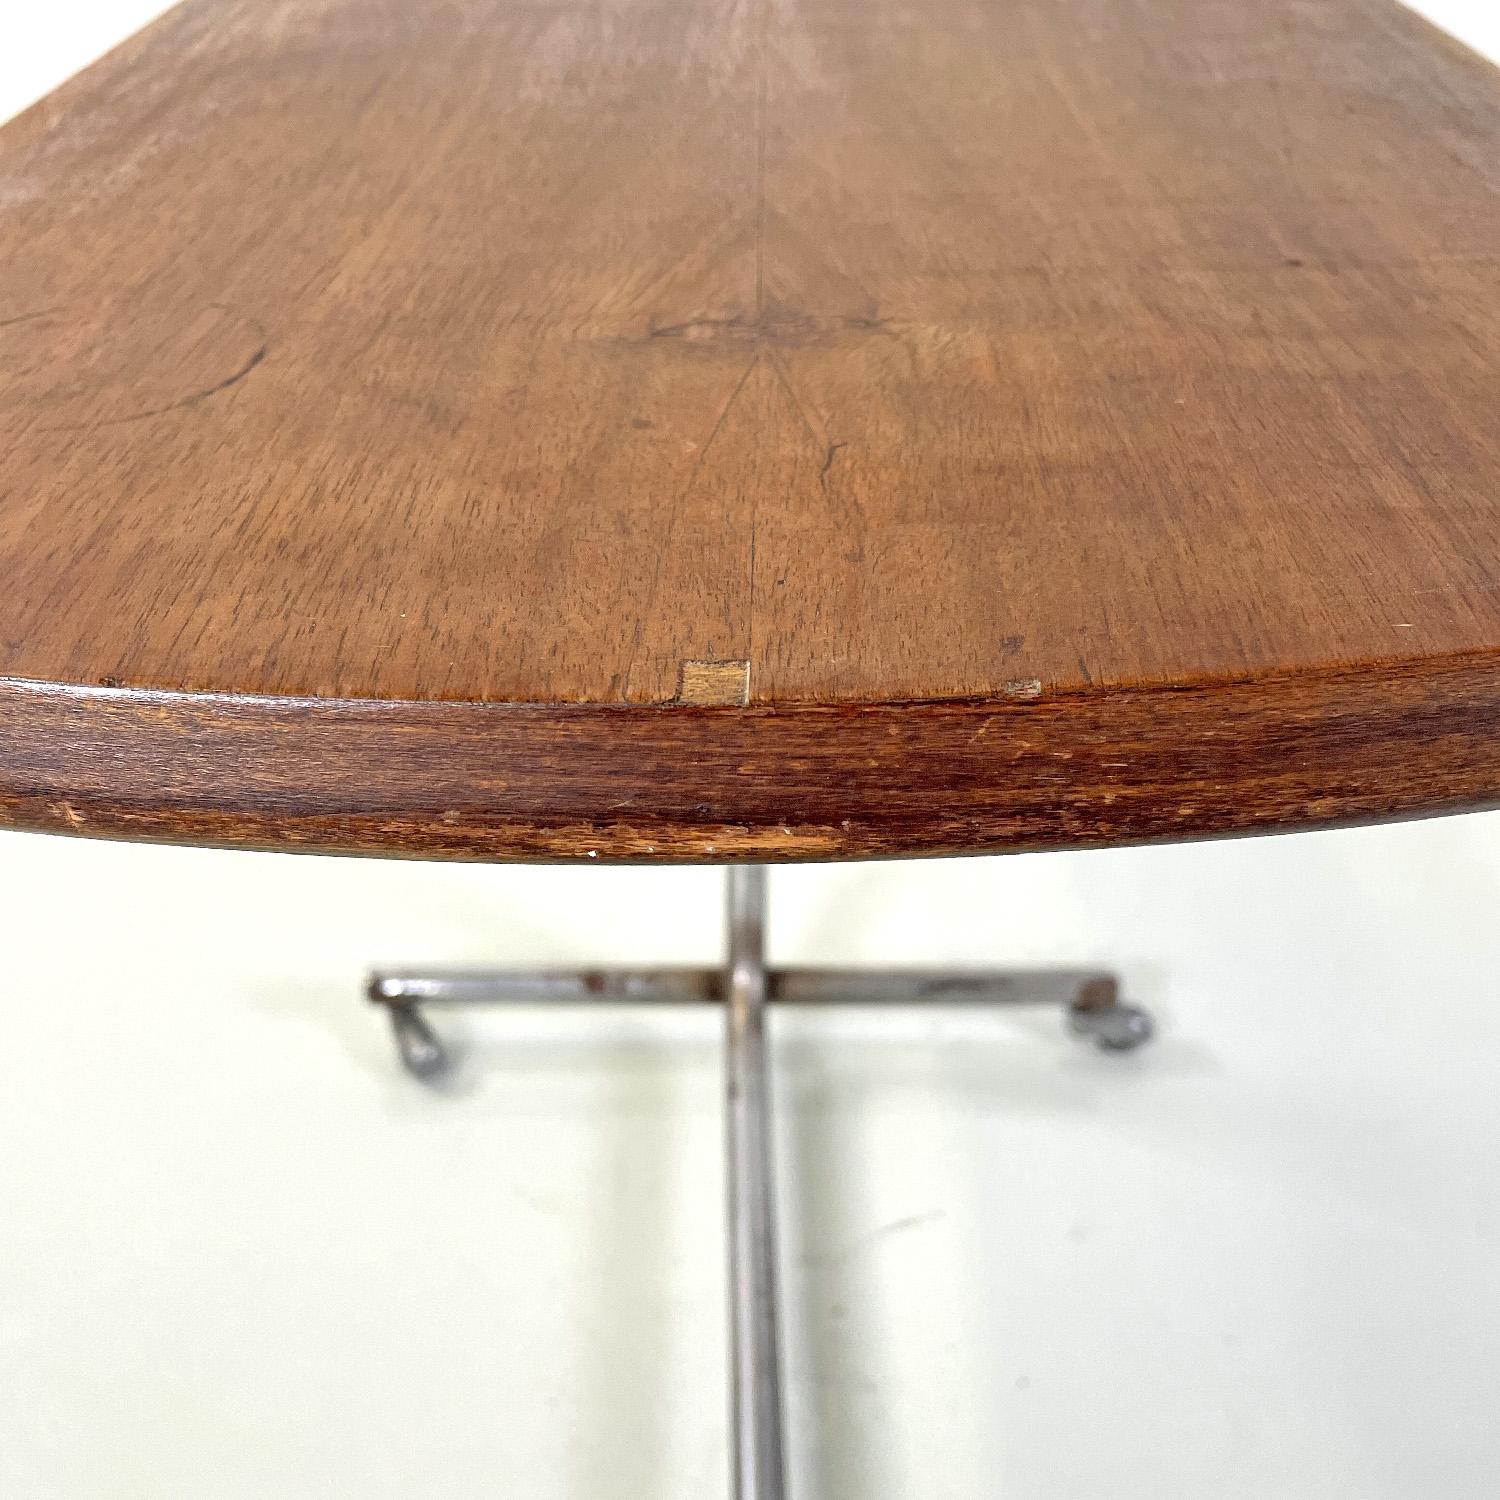 Italian mid-century modern wood and metal industrial work table, 1960s For Sale 8